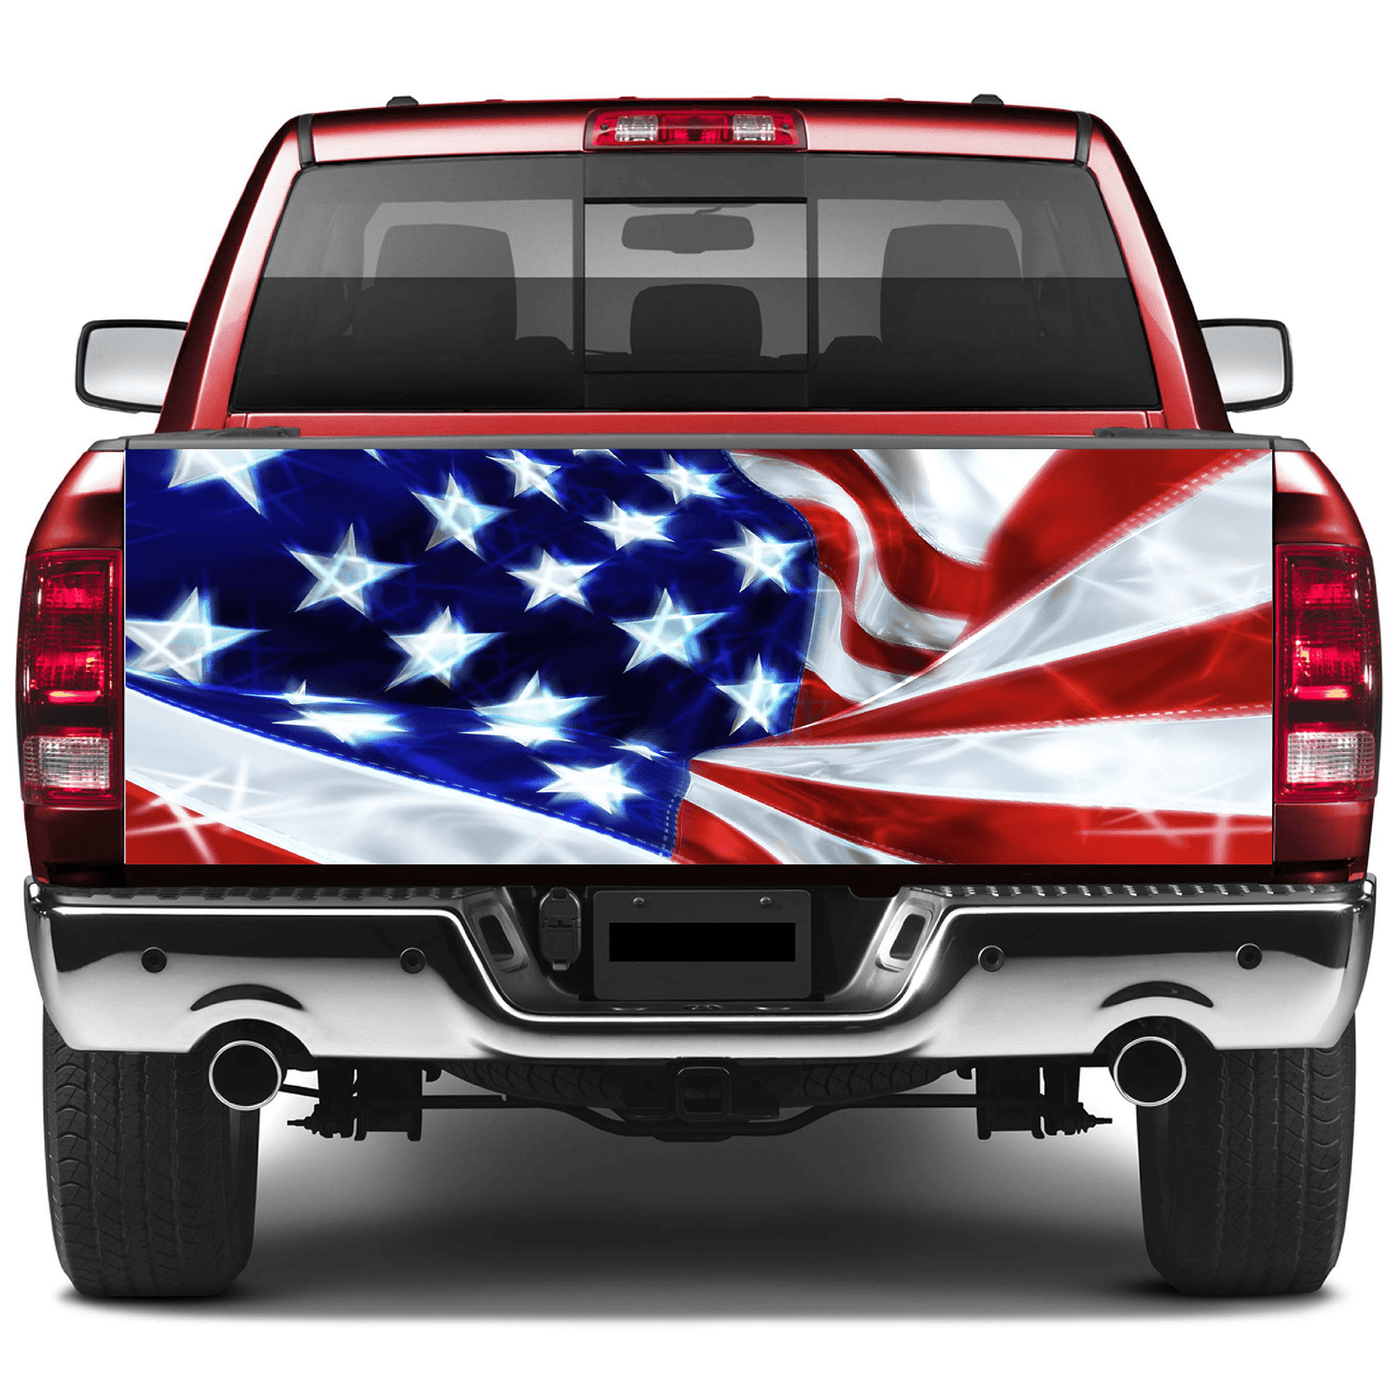 Tailgate Wraps For Trucks Wrap Vinyl Car Decals United States Independ ...